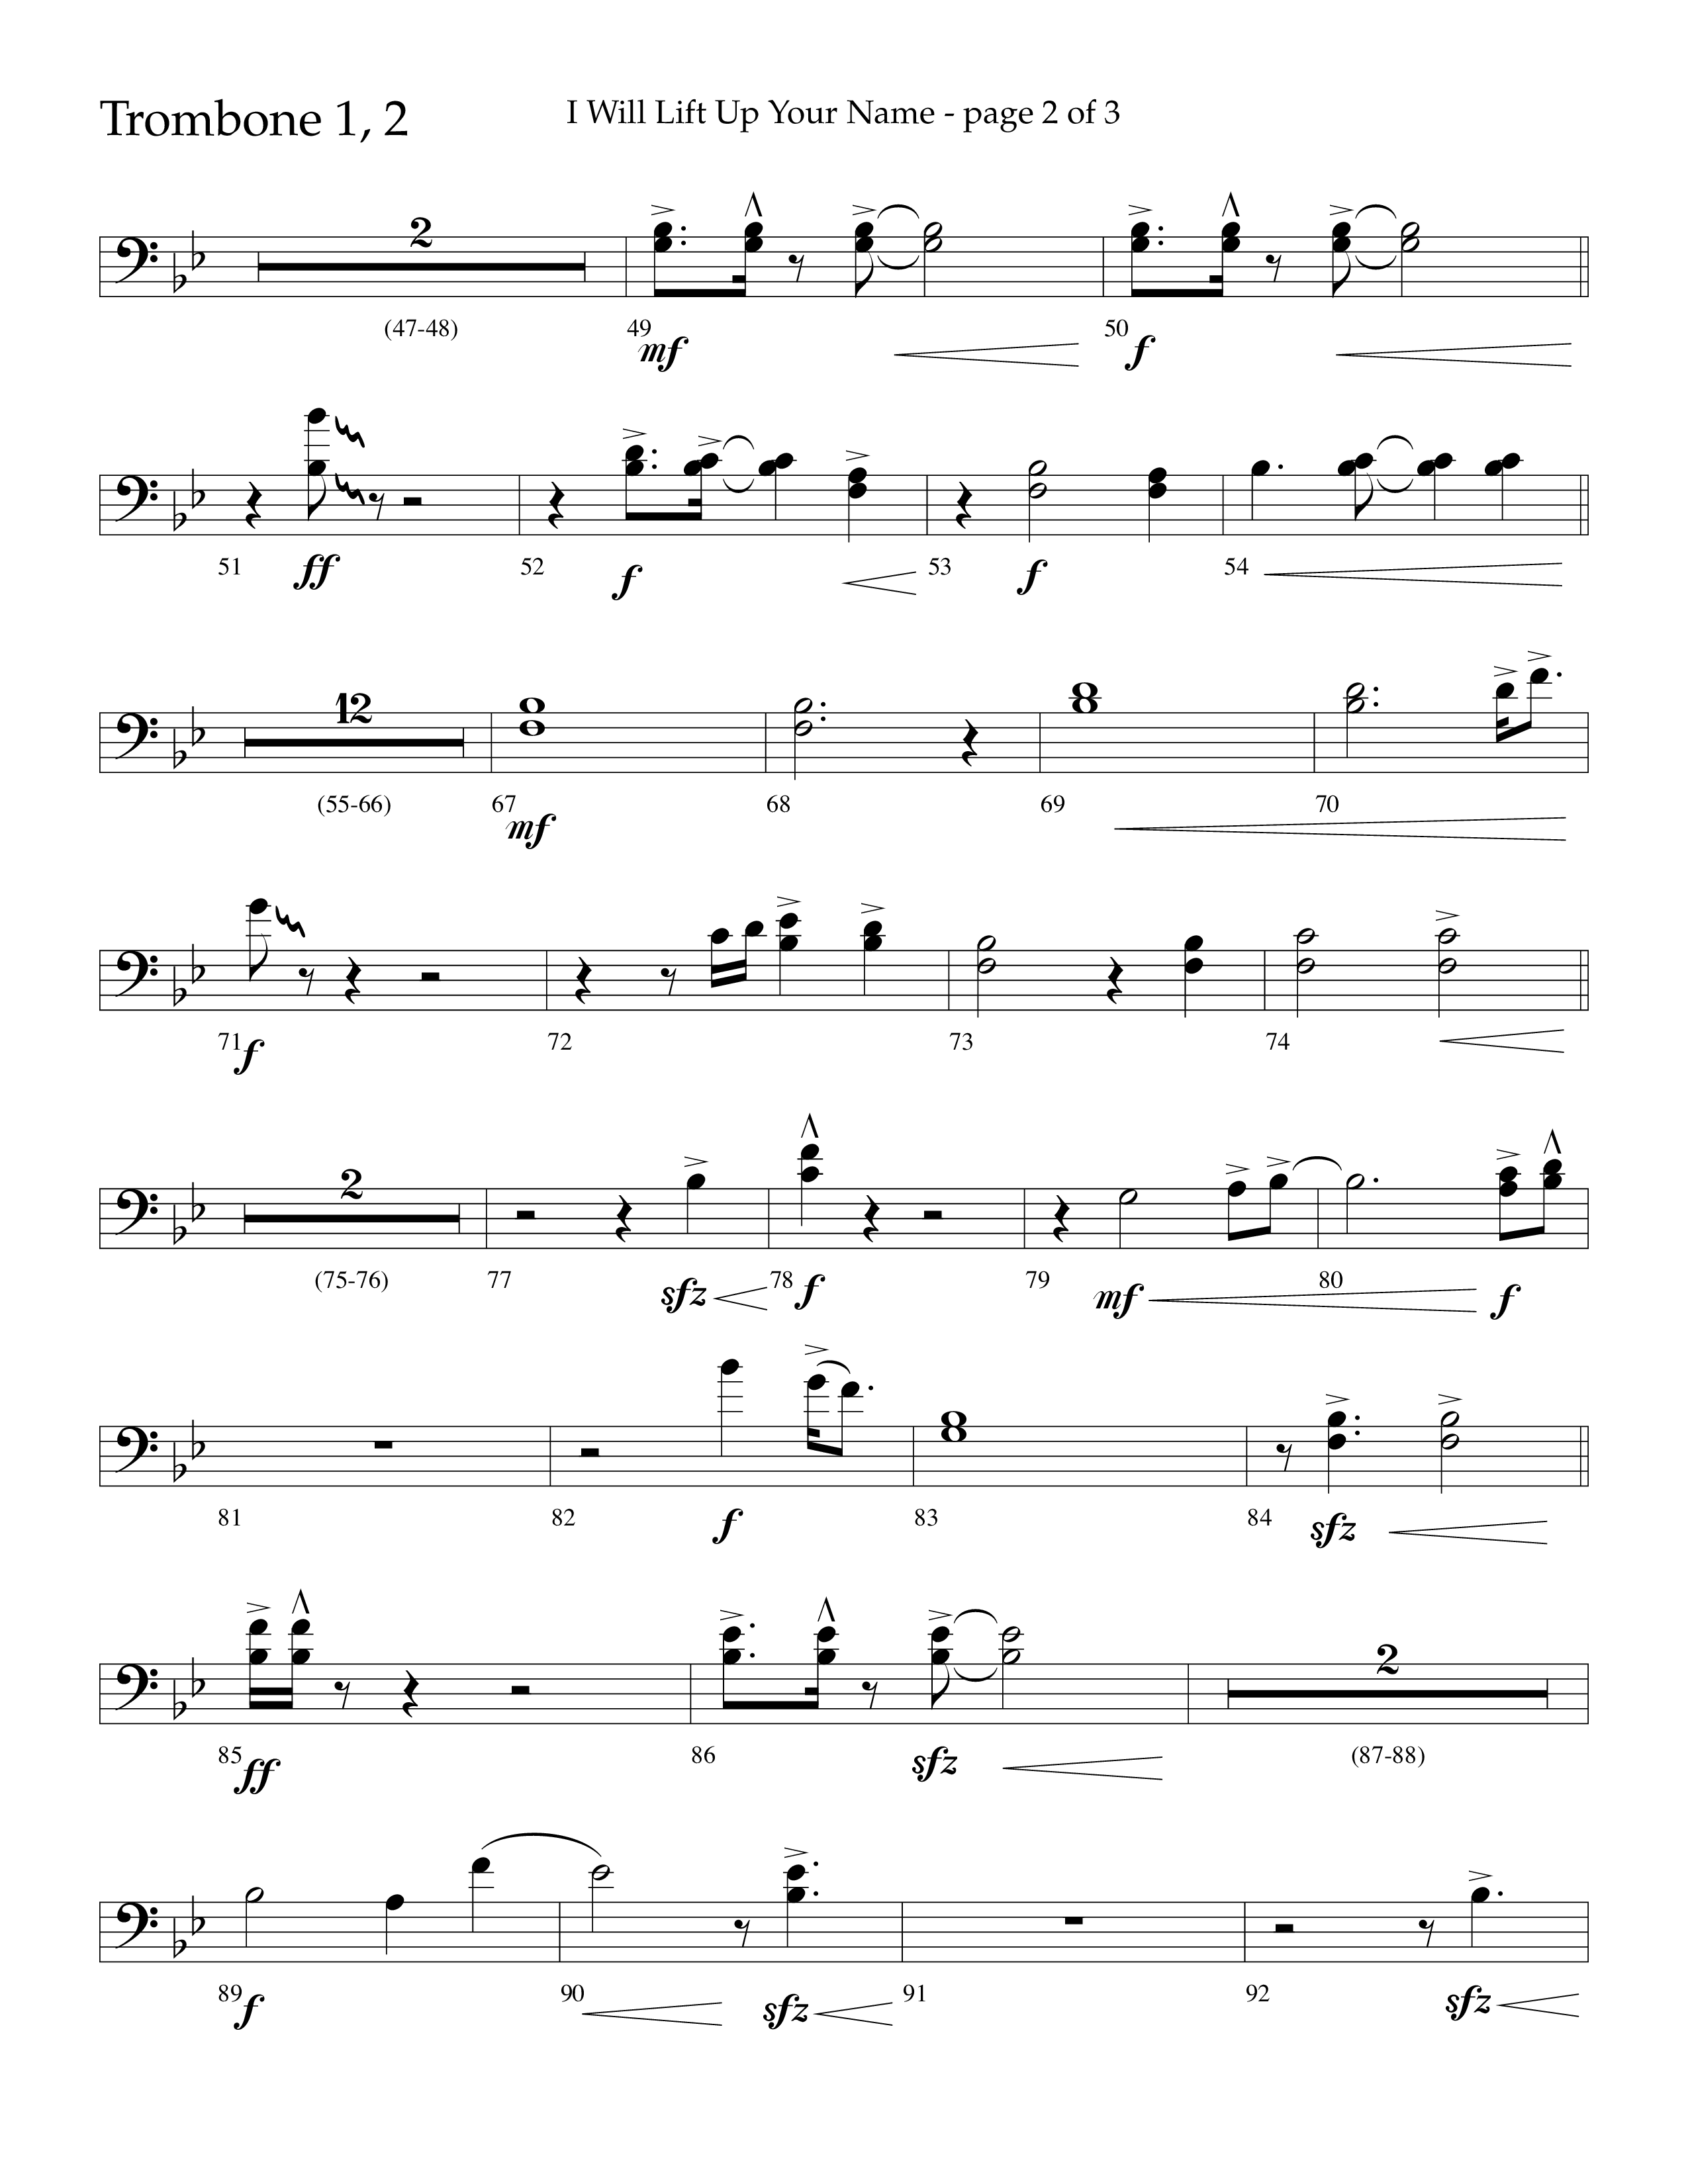 I Will Lift Up Your Name (Choral Anthem SATB) Trombone 1/2 (Lifeway Choral / Arr. John Bolin / Orch. Cliff Duren)